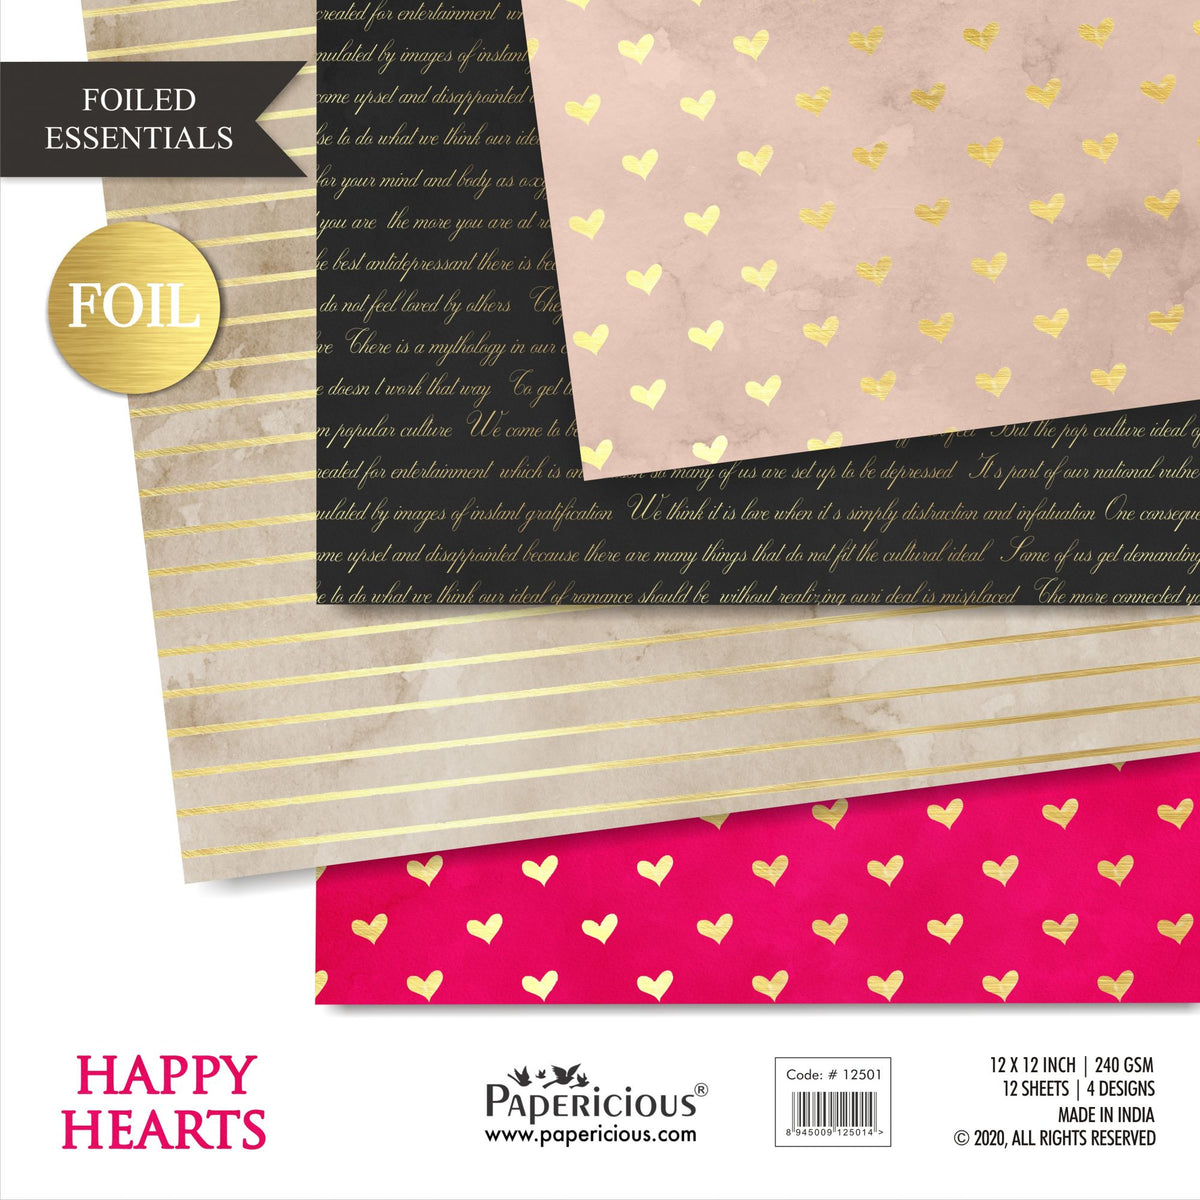 Papericious - Happy Hearts - Golden Foiled Pattern Scrapbook Papers 12x12 inch / 12 sheets